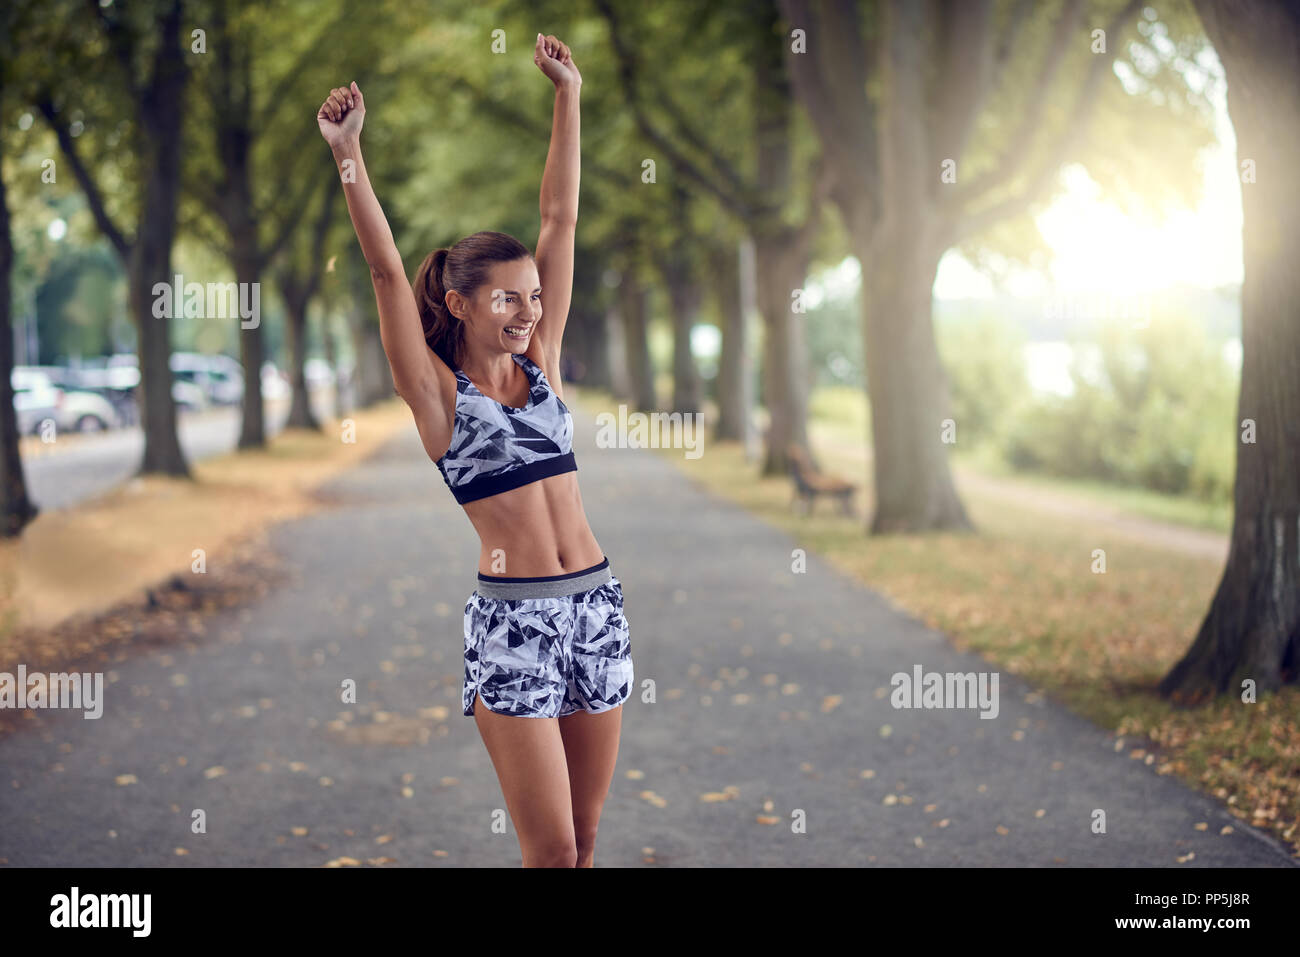 Fit Body of Beautiful, Healthy and Sporty Girl. Slim Woman Posing in  Sportswear. Stock Photo - Image of abdomen, shape: 106977298